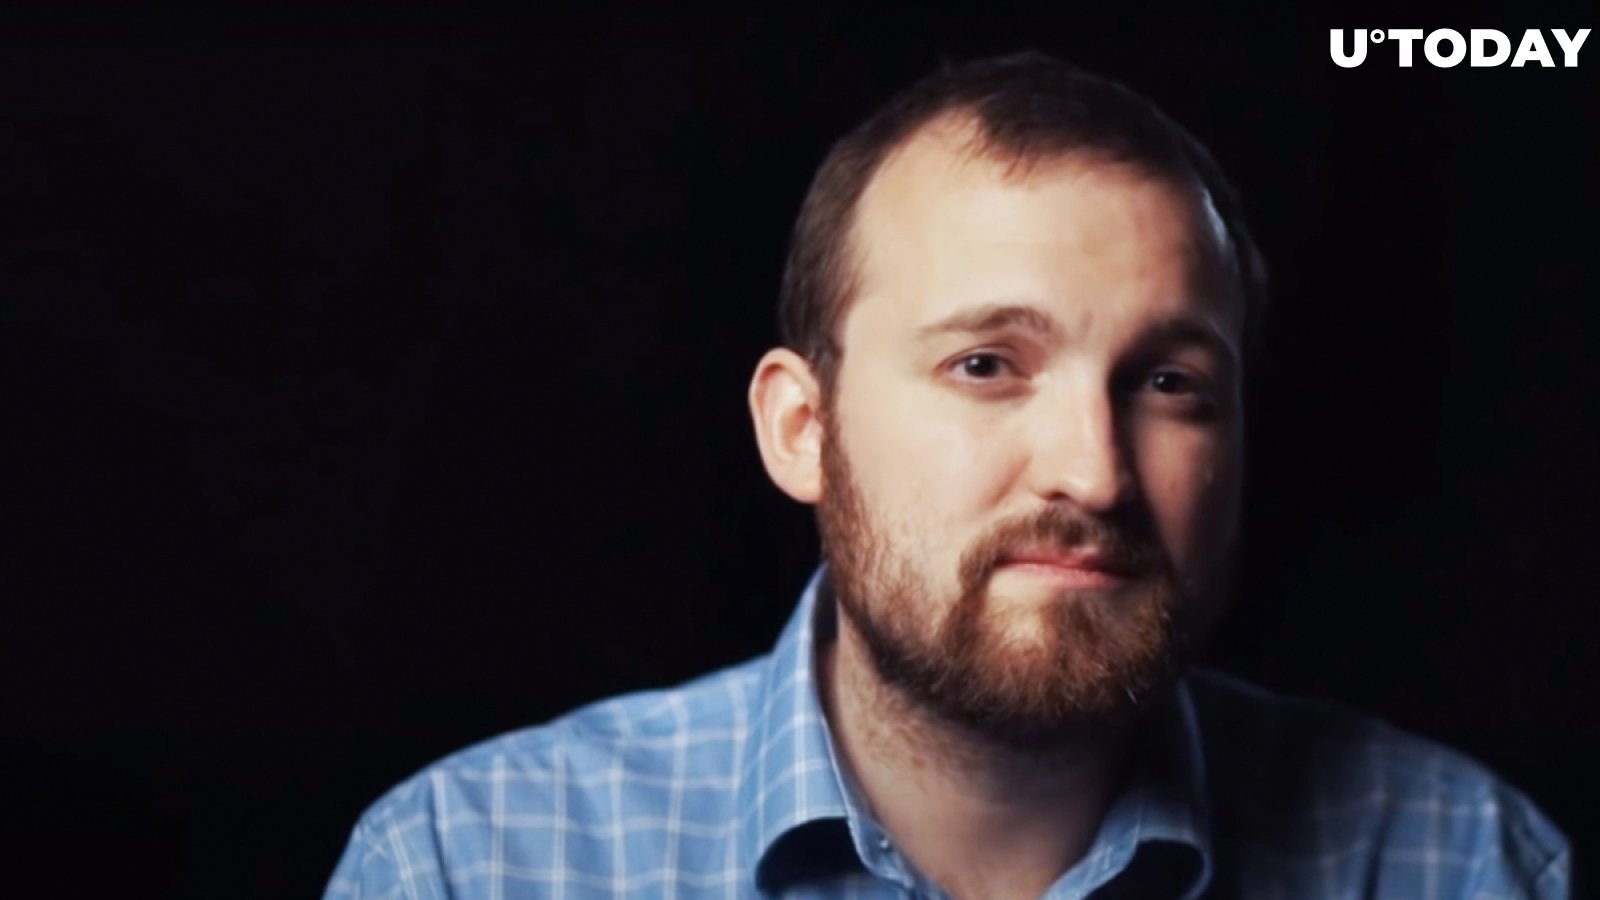 IOHK CEO Charles Hoskinson Blamed for Crypto Scams on YouTube, Urges Platform to "Wake Up"